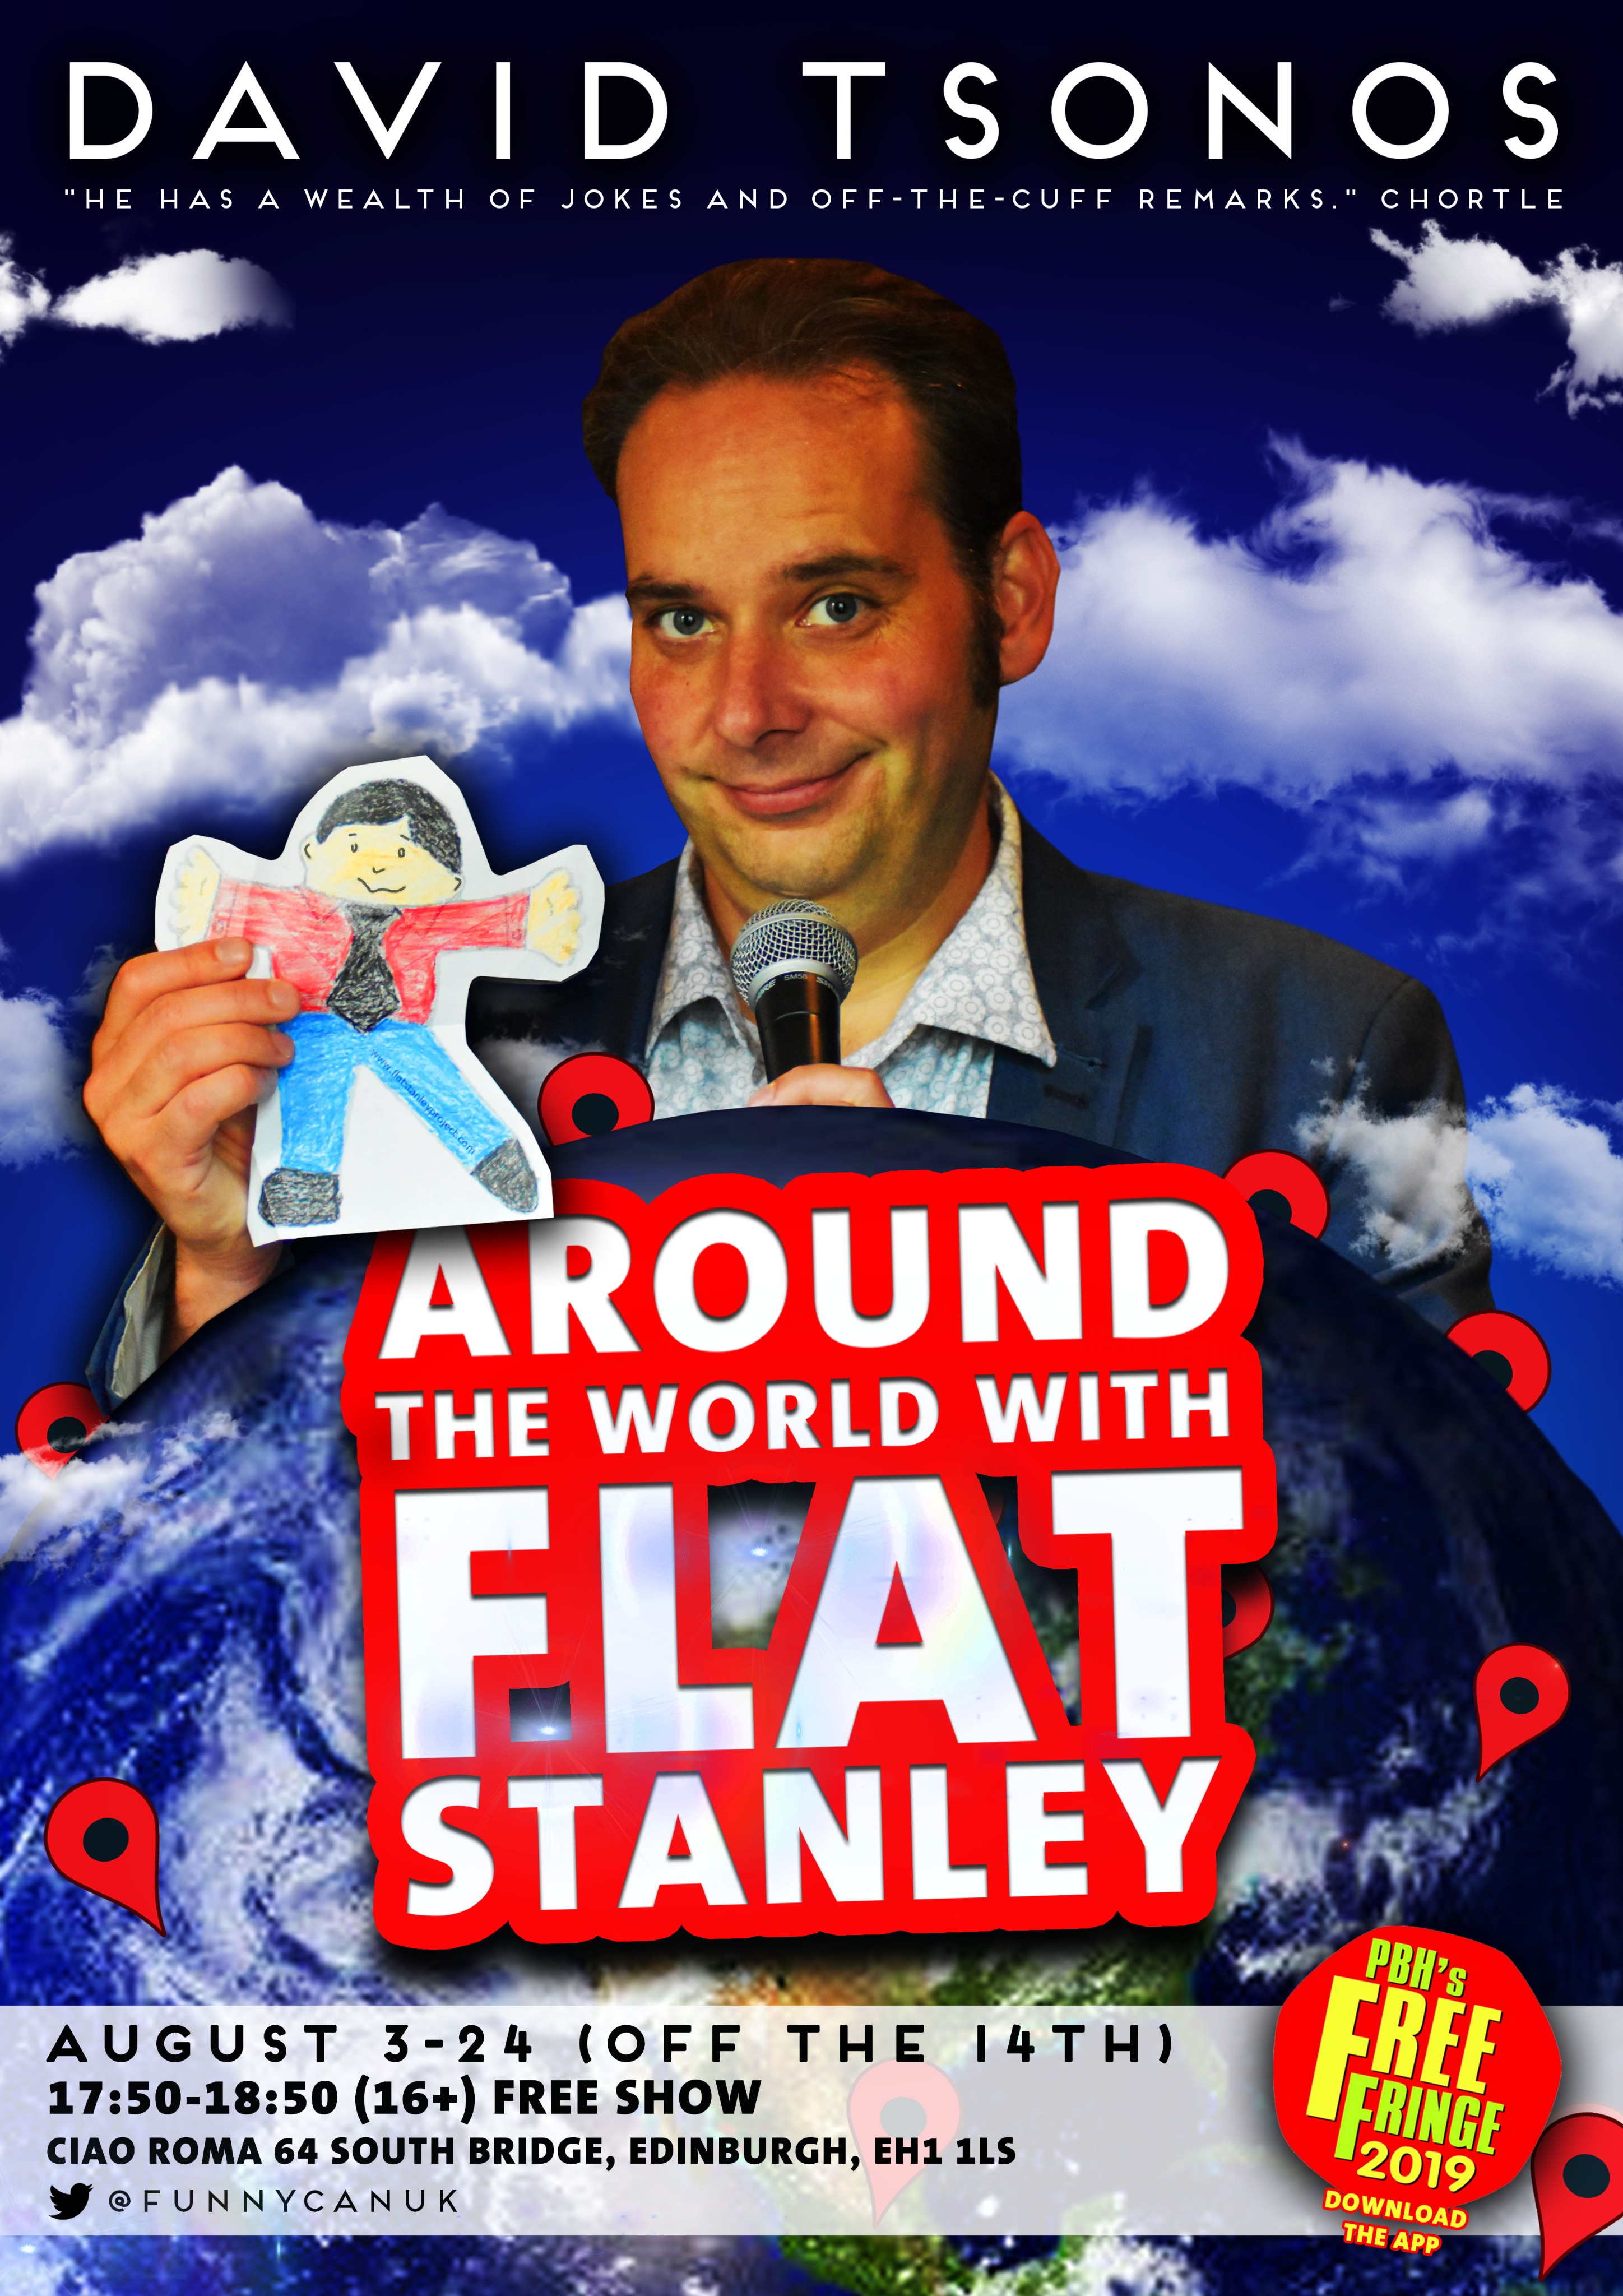 The poster for David Tsonos: Around The World With Flat Stanley